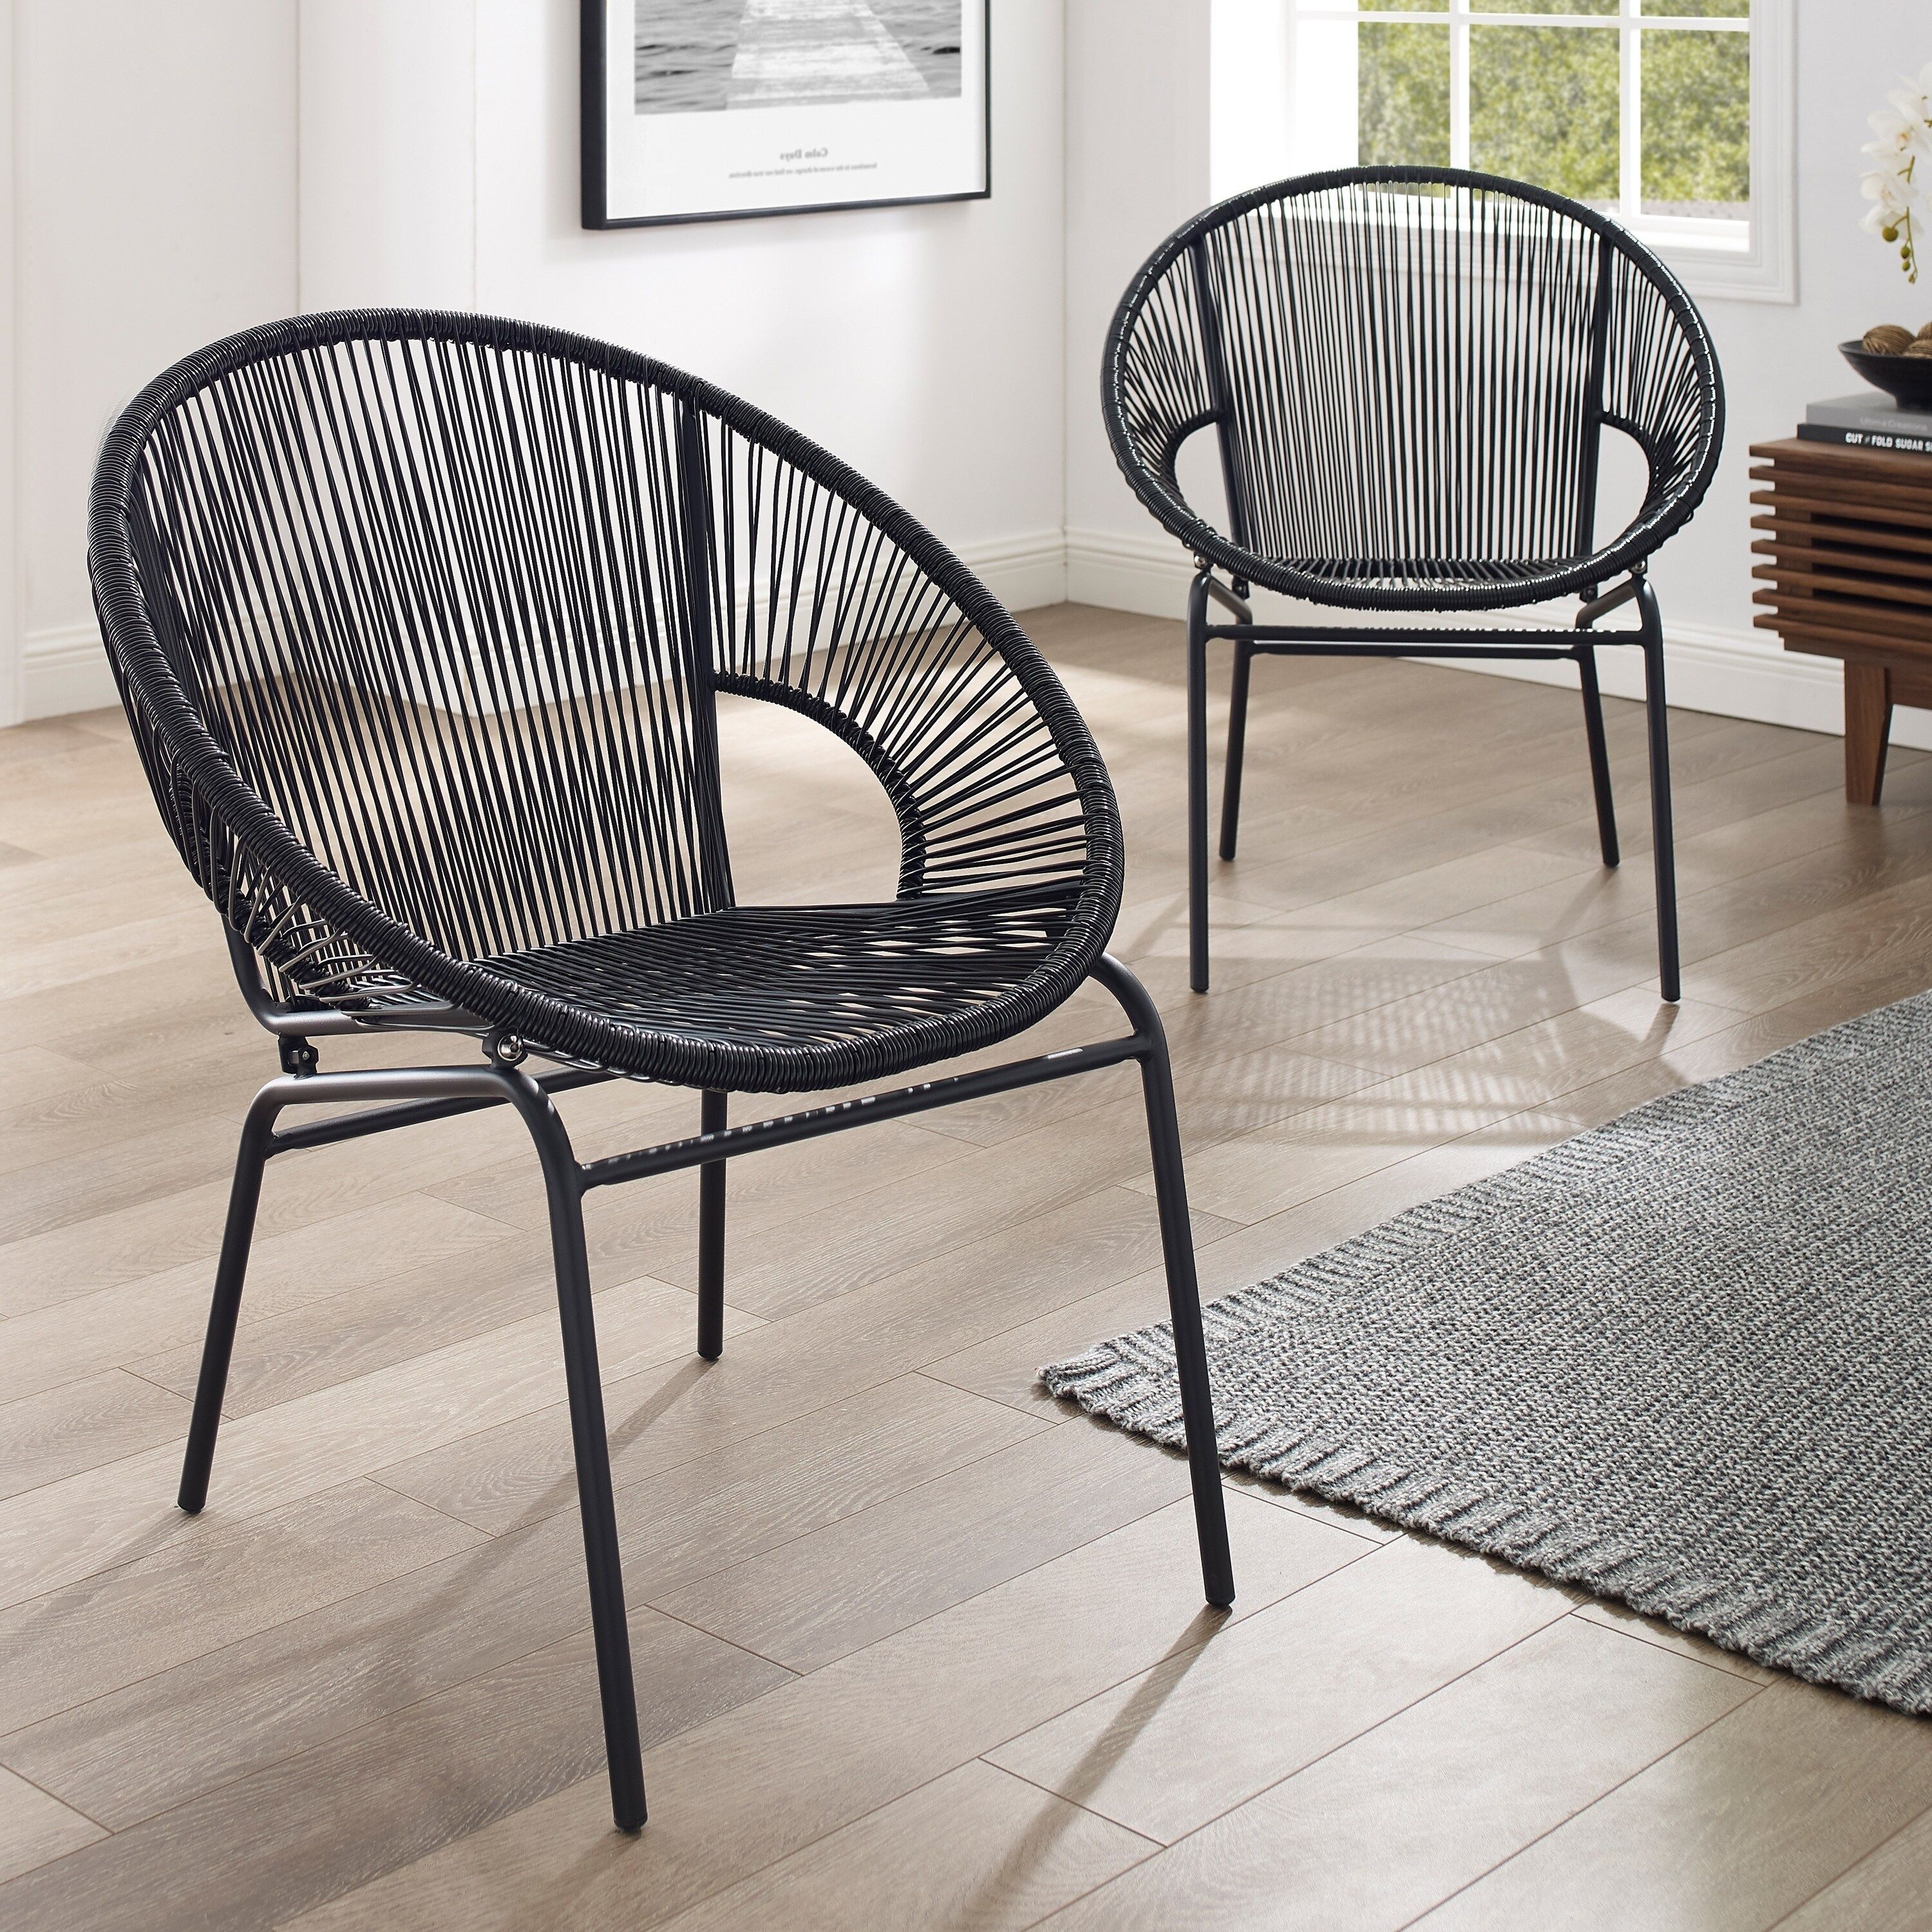 Corvus Sarcelles Woven Wicker Patio Chairs (Set of 2) | Bed Bath & Beyond